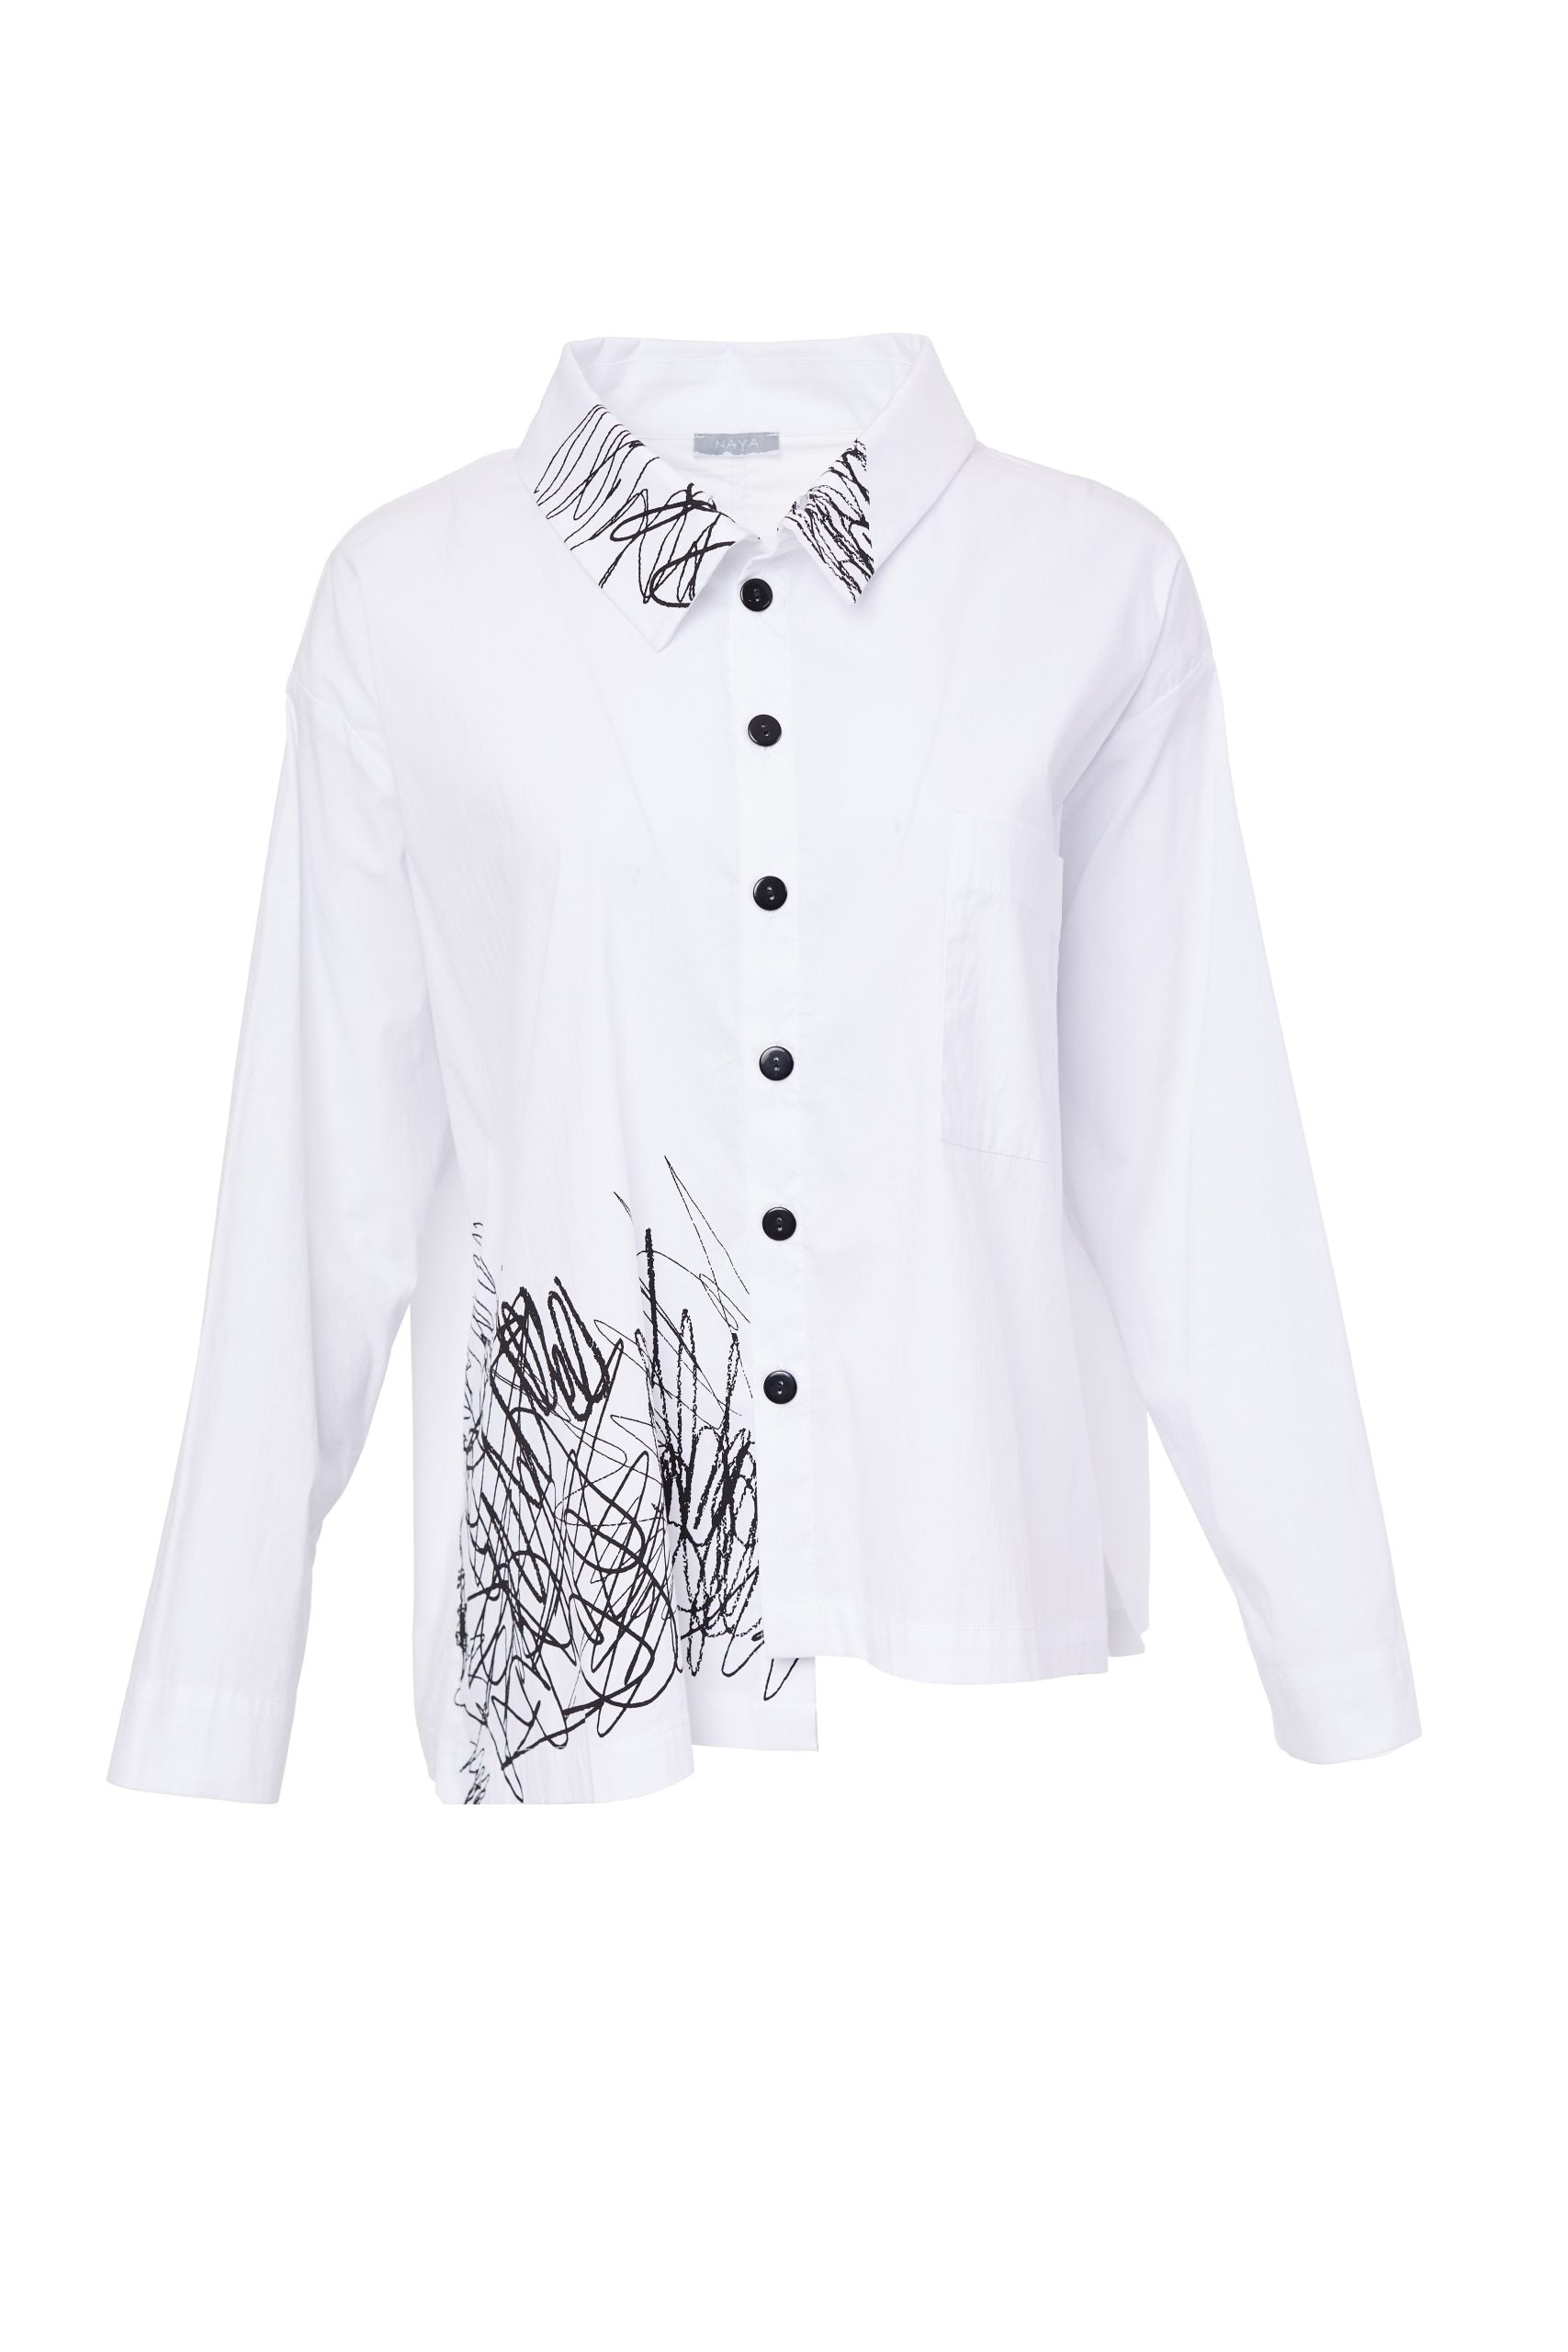 Sid Placement Print Shirt with Collae